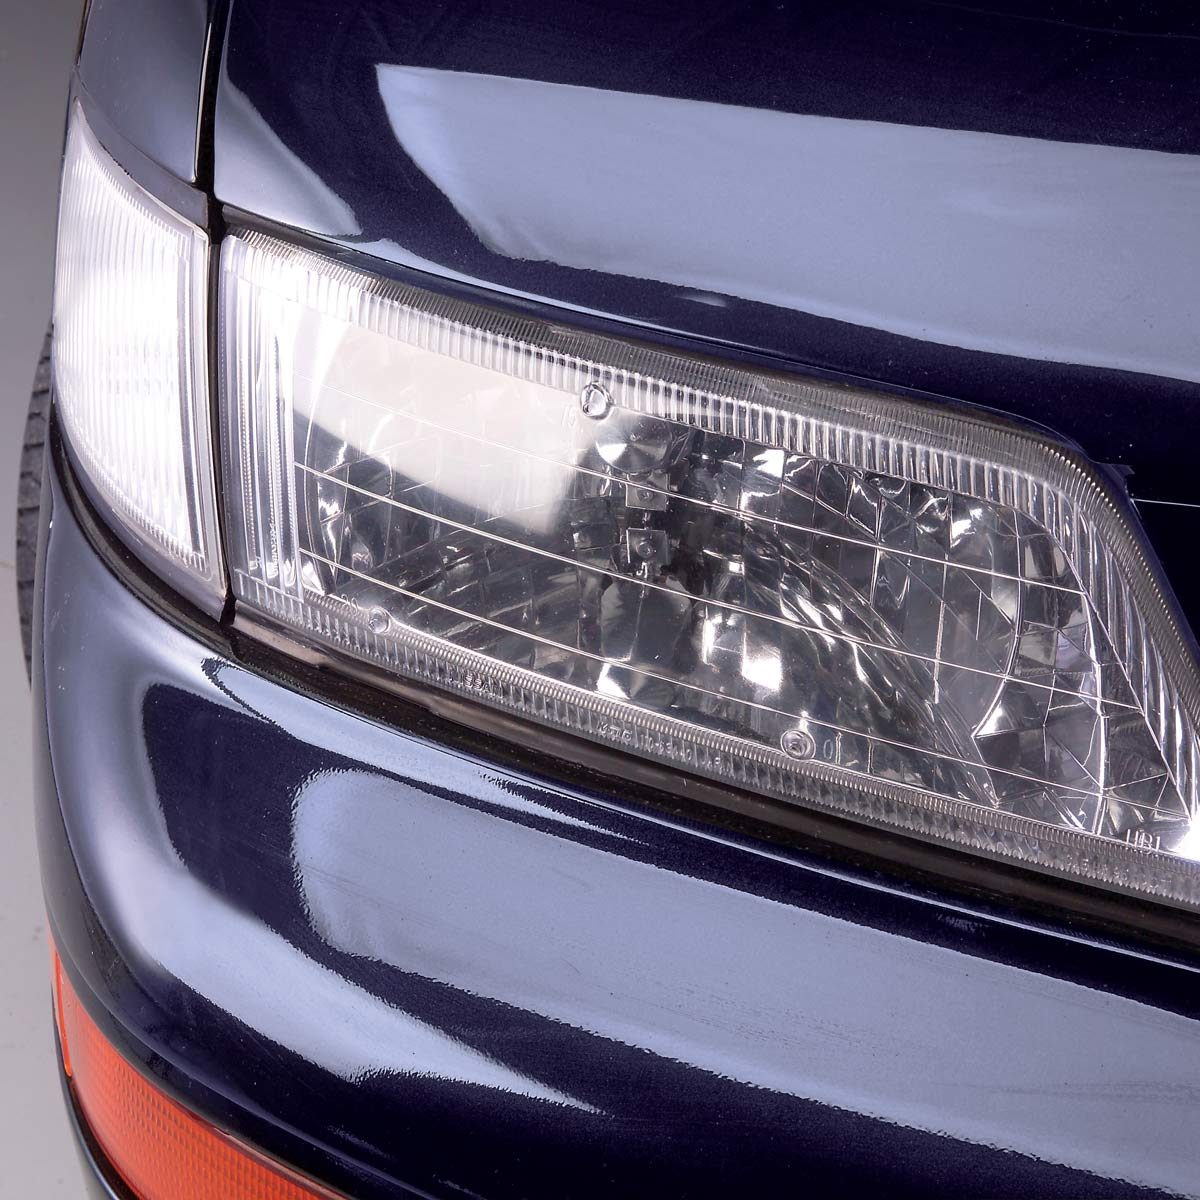 How to Restore Headlights - Clean Headlights on Your Car